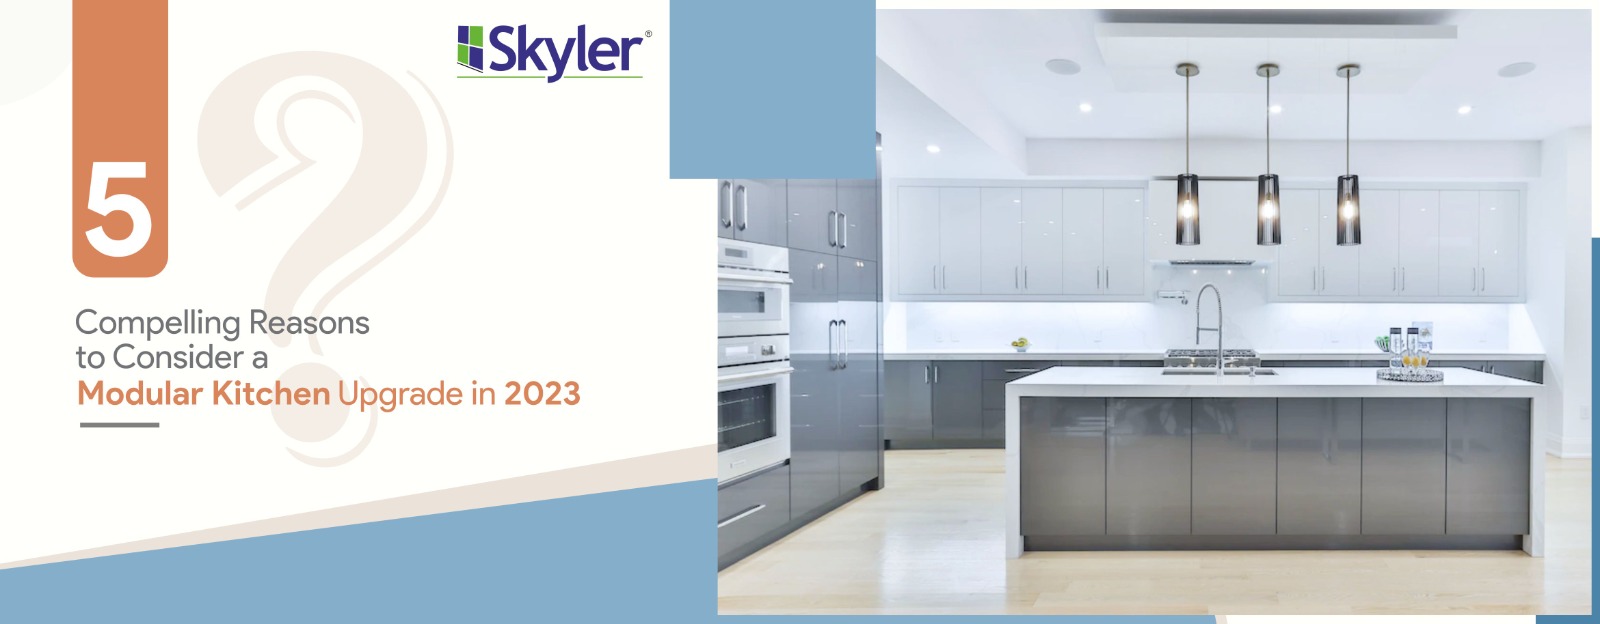 five-Compelling-Reasons-to-Consider-a-Modular-Kitchen-Upgrade-in-2023